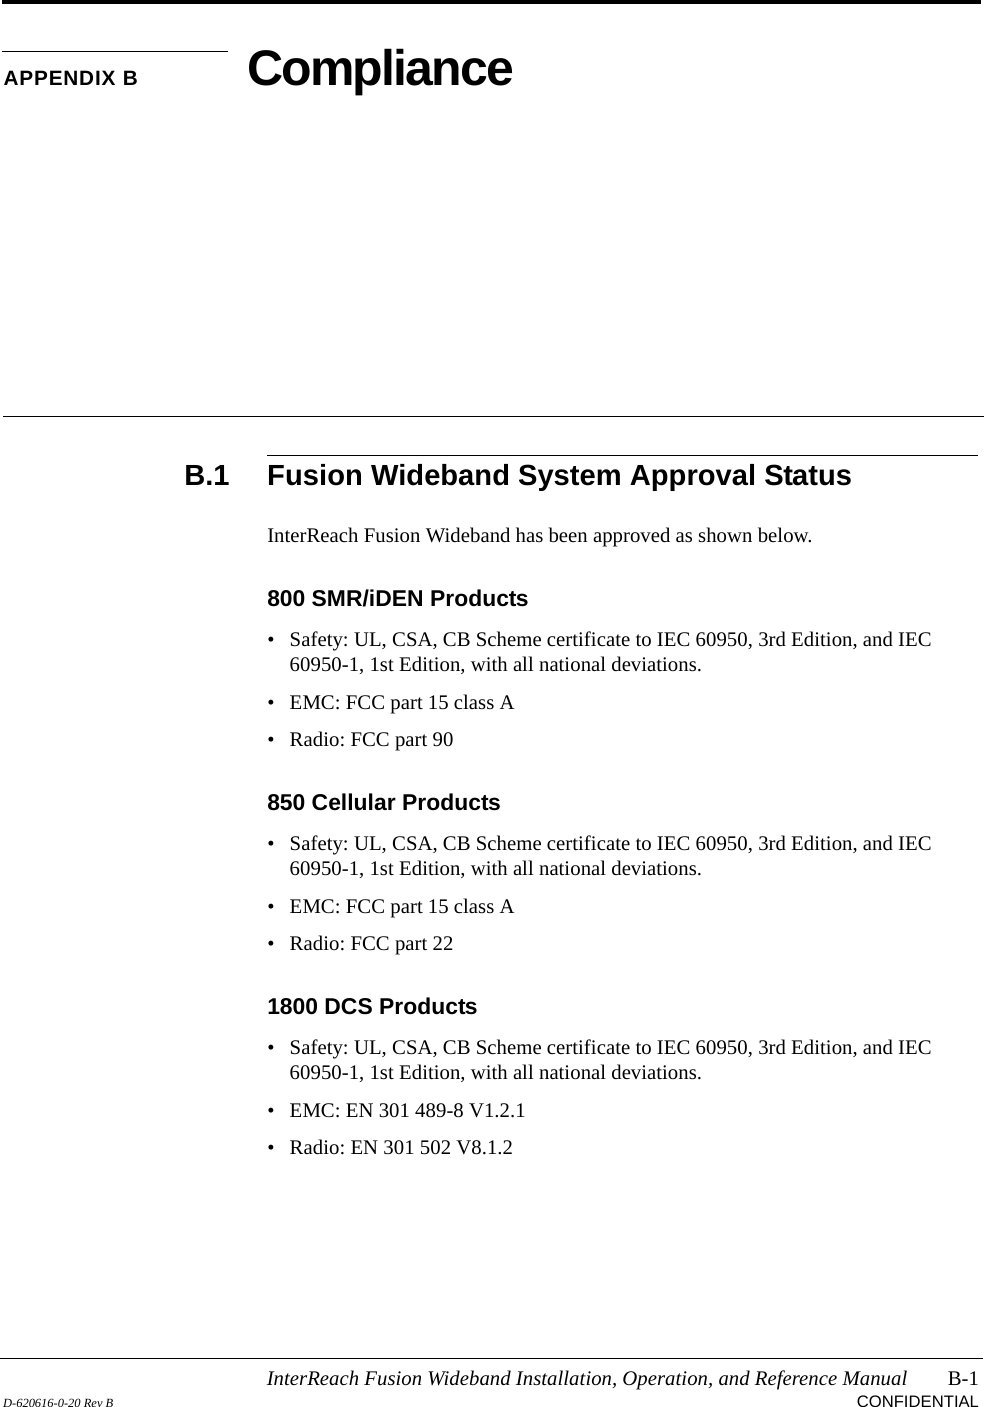 InterReach Fusion Wideband Installation, Operation, and Reference Manual B-1D-620616-0-20 Rev B CONFIDENTIALAPPENDIX B ComplianceB.1 Fusion Wideband System Approval StatusInterReach Fusion Wideband has been approved as shown below.800 SMR/iDEN Products• Safety: UL, CSA, CB Scheme certificate to IEC 60950, 3rd Edition, and IEC 60950-1, 1st Edition, with all national deviations.• EMC: FCC part 15 class A• Radio: FCC part 90850 Cellular Products• Safety: UL, CSA, CB Scheme certificate to IEC 60950, 3rd Edition, and IEC 60950-1, 1st Edition, with all national deviations.• EMC: FCC part 15 class A• Radio: FCC part 221800 DCS Products• Safety: UL, CSA, CB Scheme certificate to IEC 60950, 3rd Edition, and IEC 60950-1, 1st Edition, with all national deviations.• EMC: EN 301 489-8 V1.2.1• Radio: EN 301 502 V8.1.2